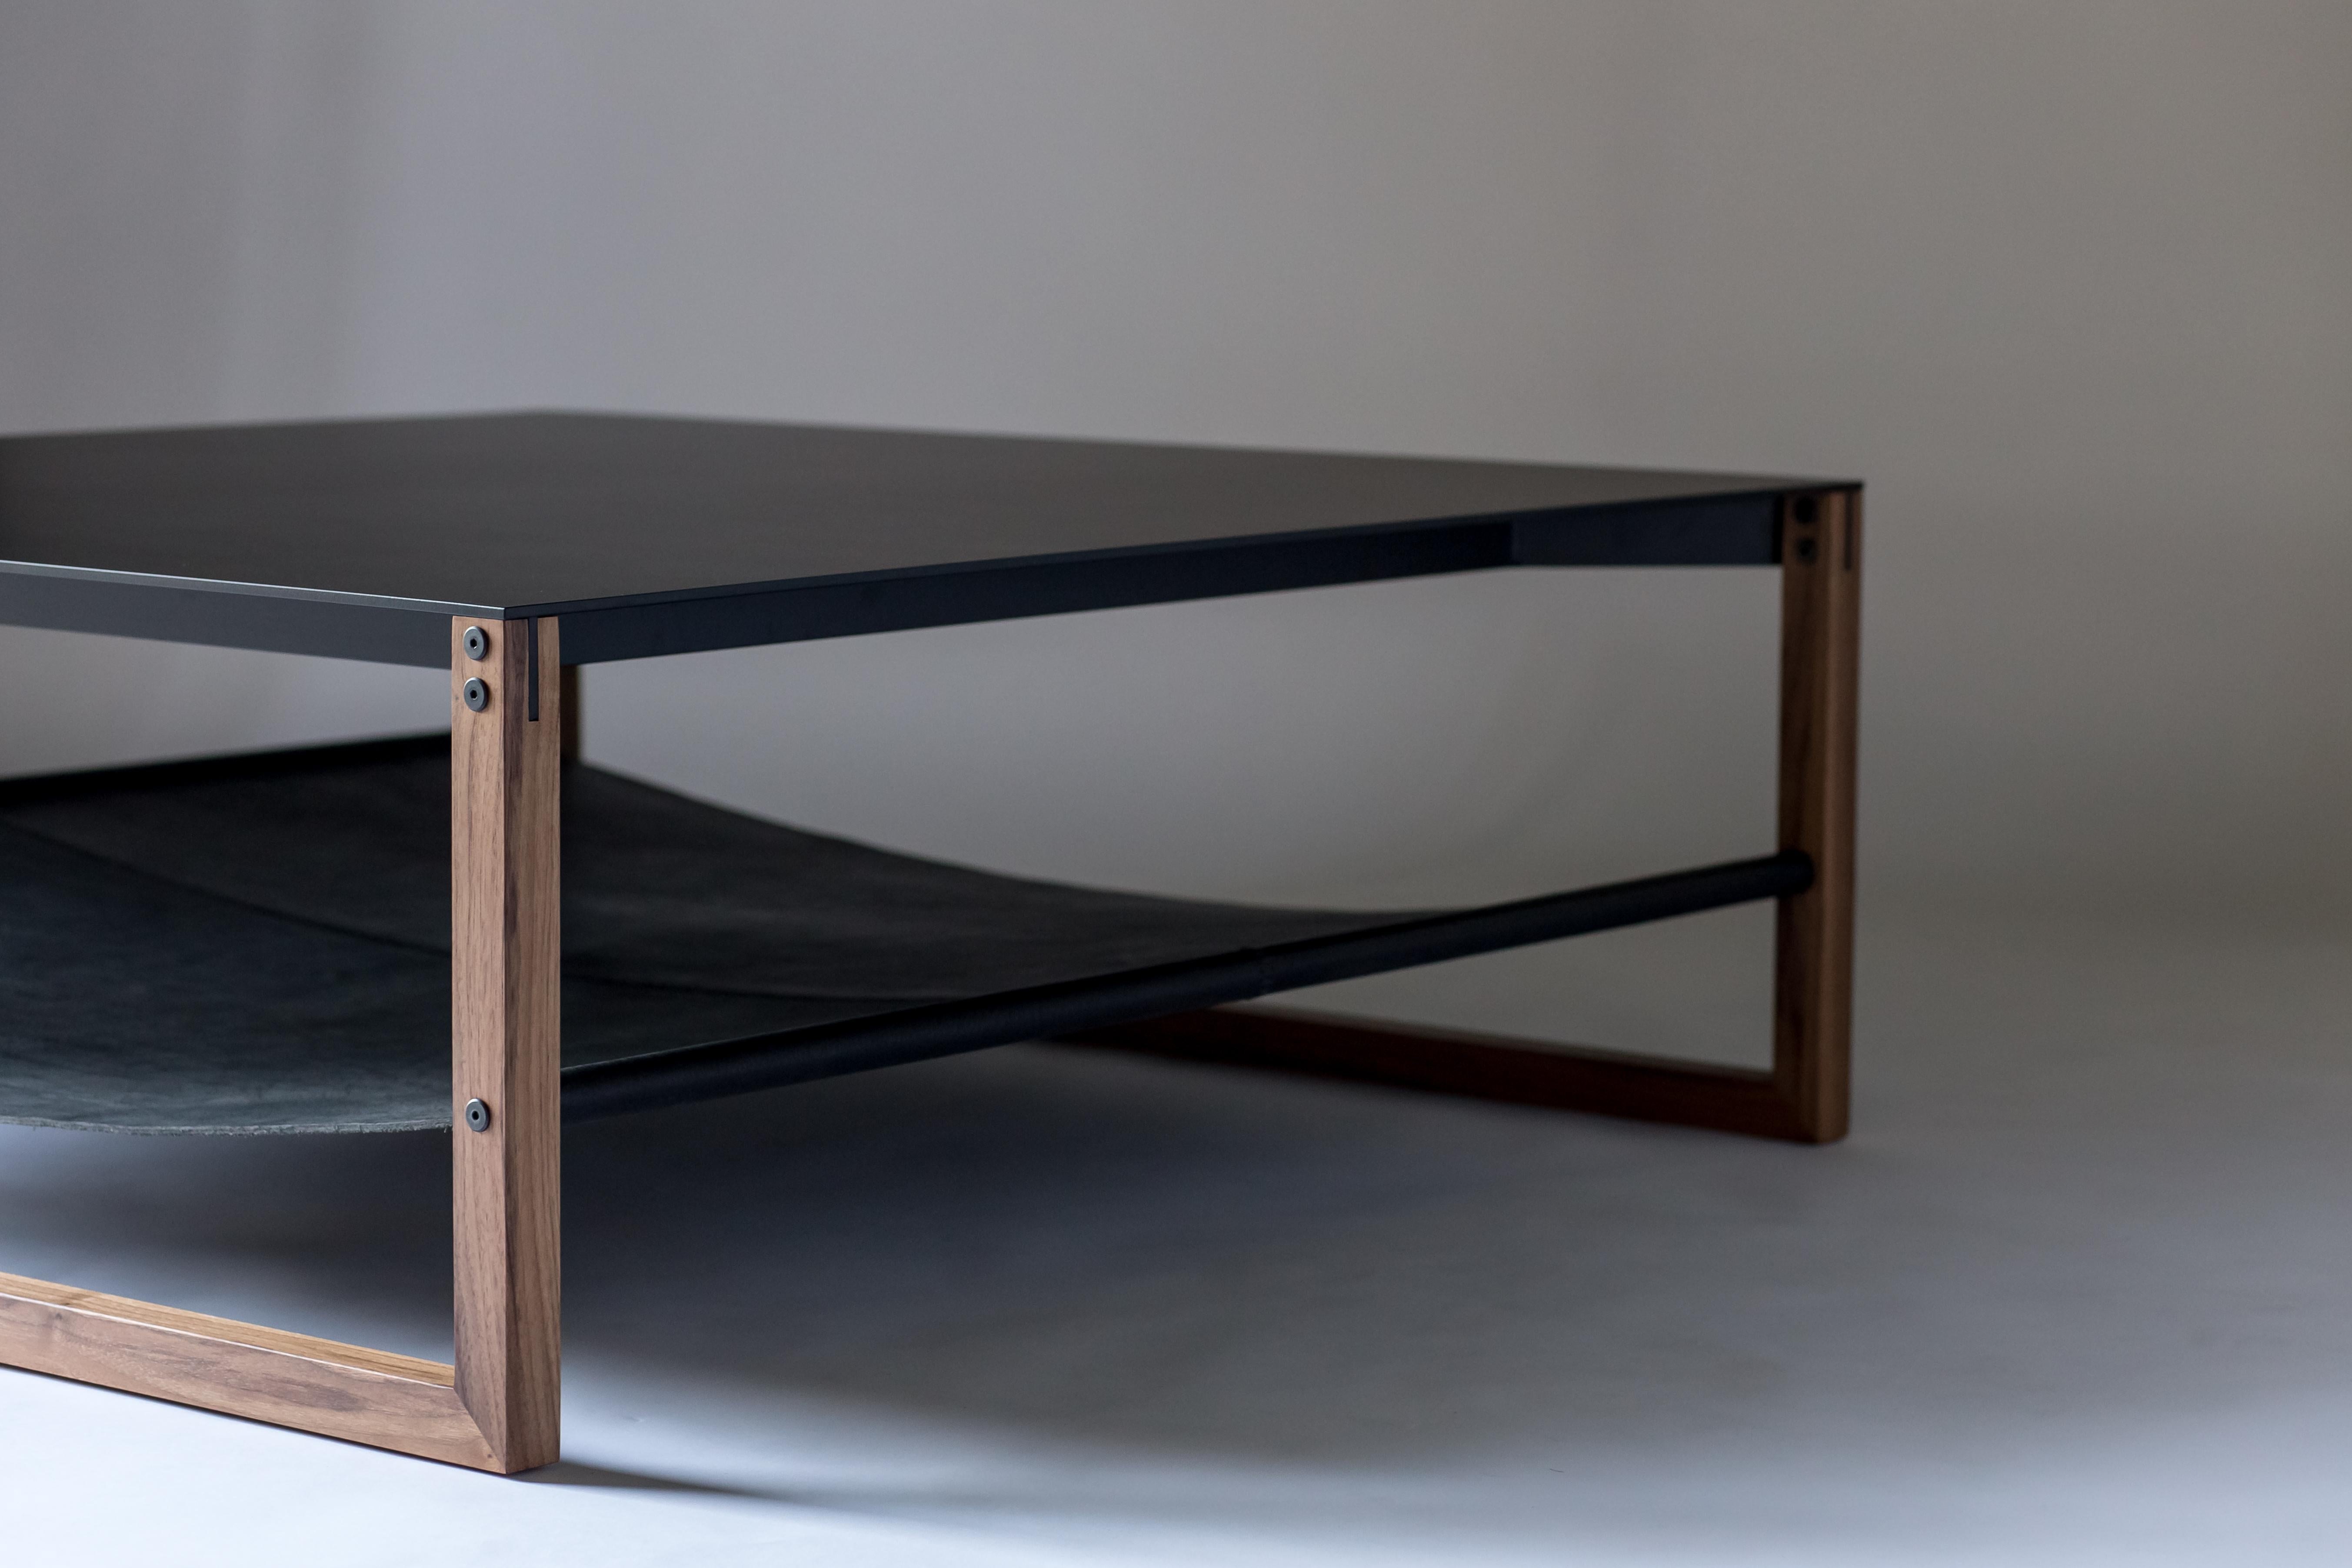 The Sling, modern aluminum, leather and walnut square coffee table.

Minimal and elegant form paired with a balanced and thoughtful design. The Sling coffee table features powder-coated aluminum, blackened hand-stitched leather, and hand finished